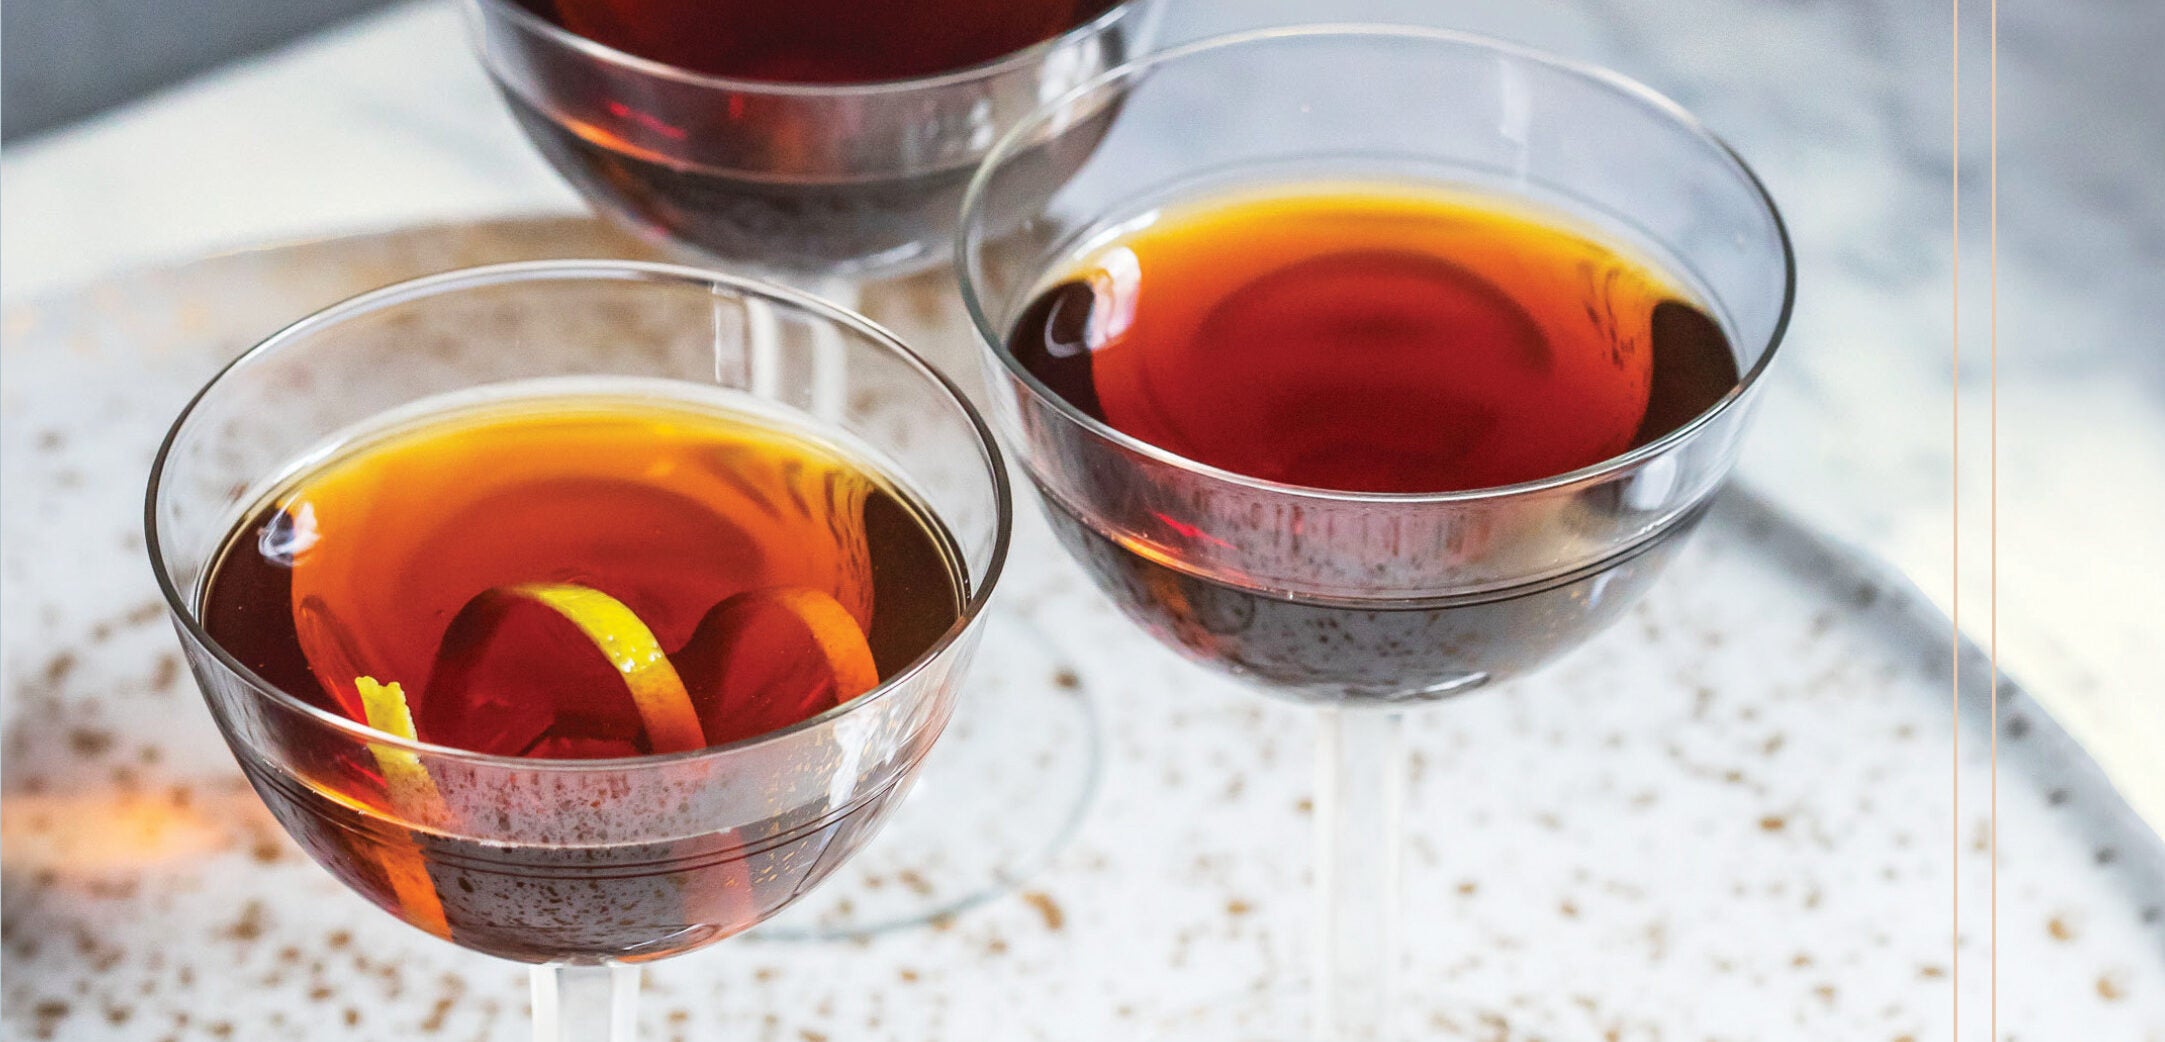 The Negroni… and other cocktails for your consideration this season